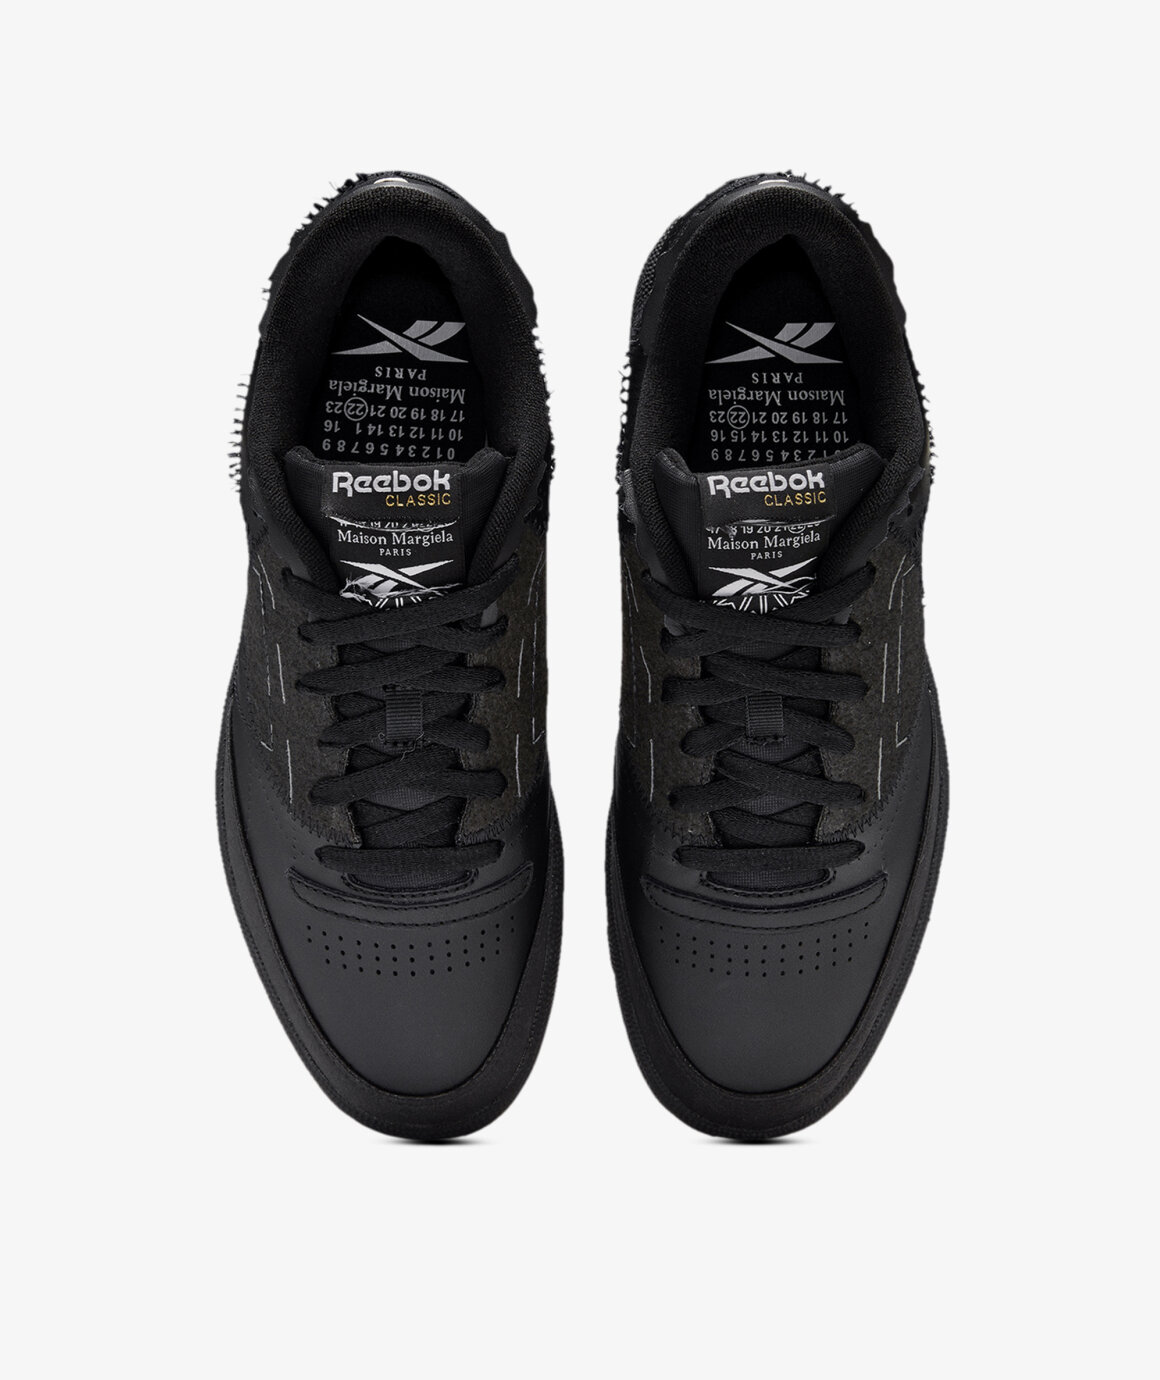 Norse Store | Shipping Worldwide - Reebok MM6 Project 0 CC MO - Black